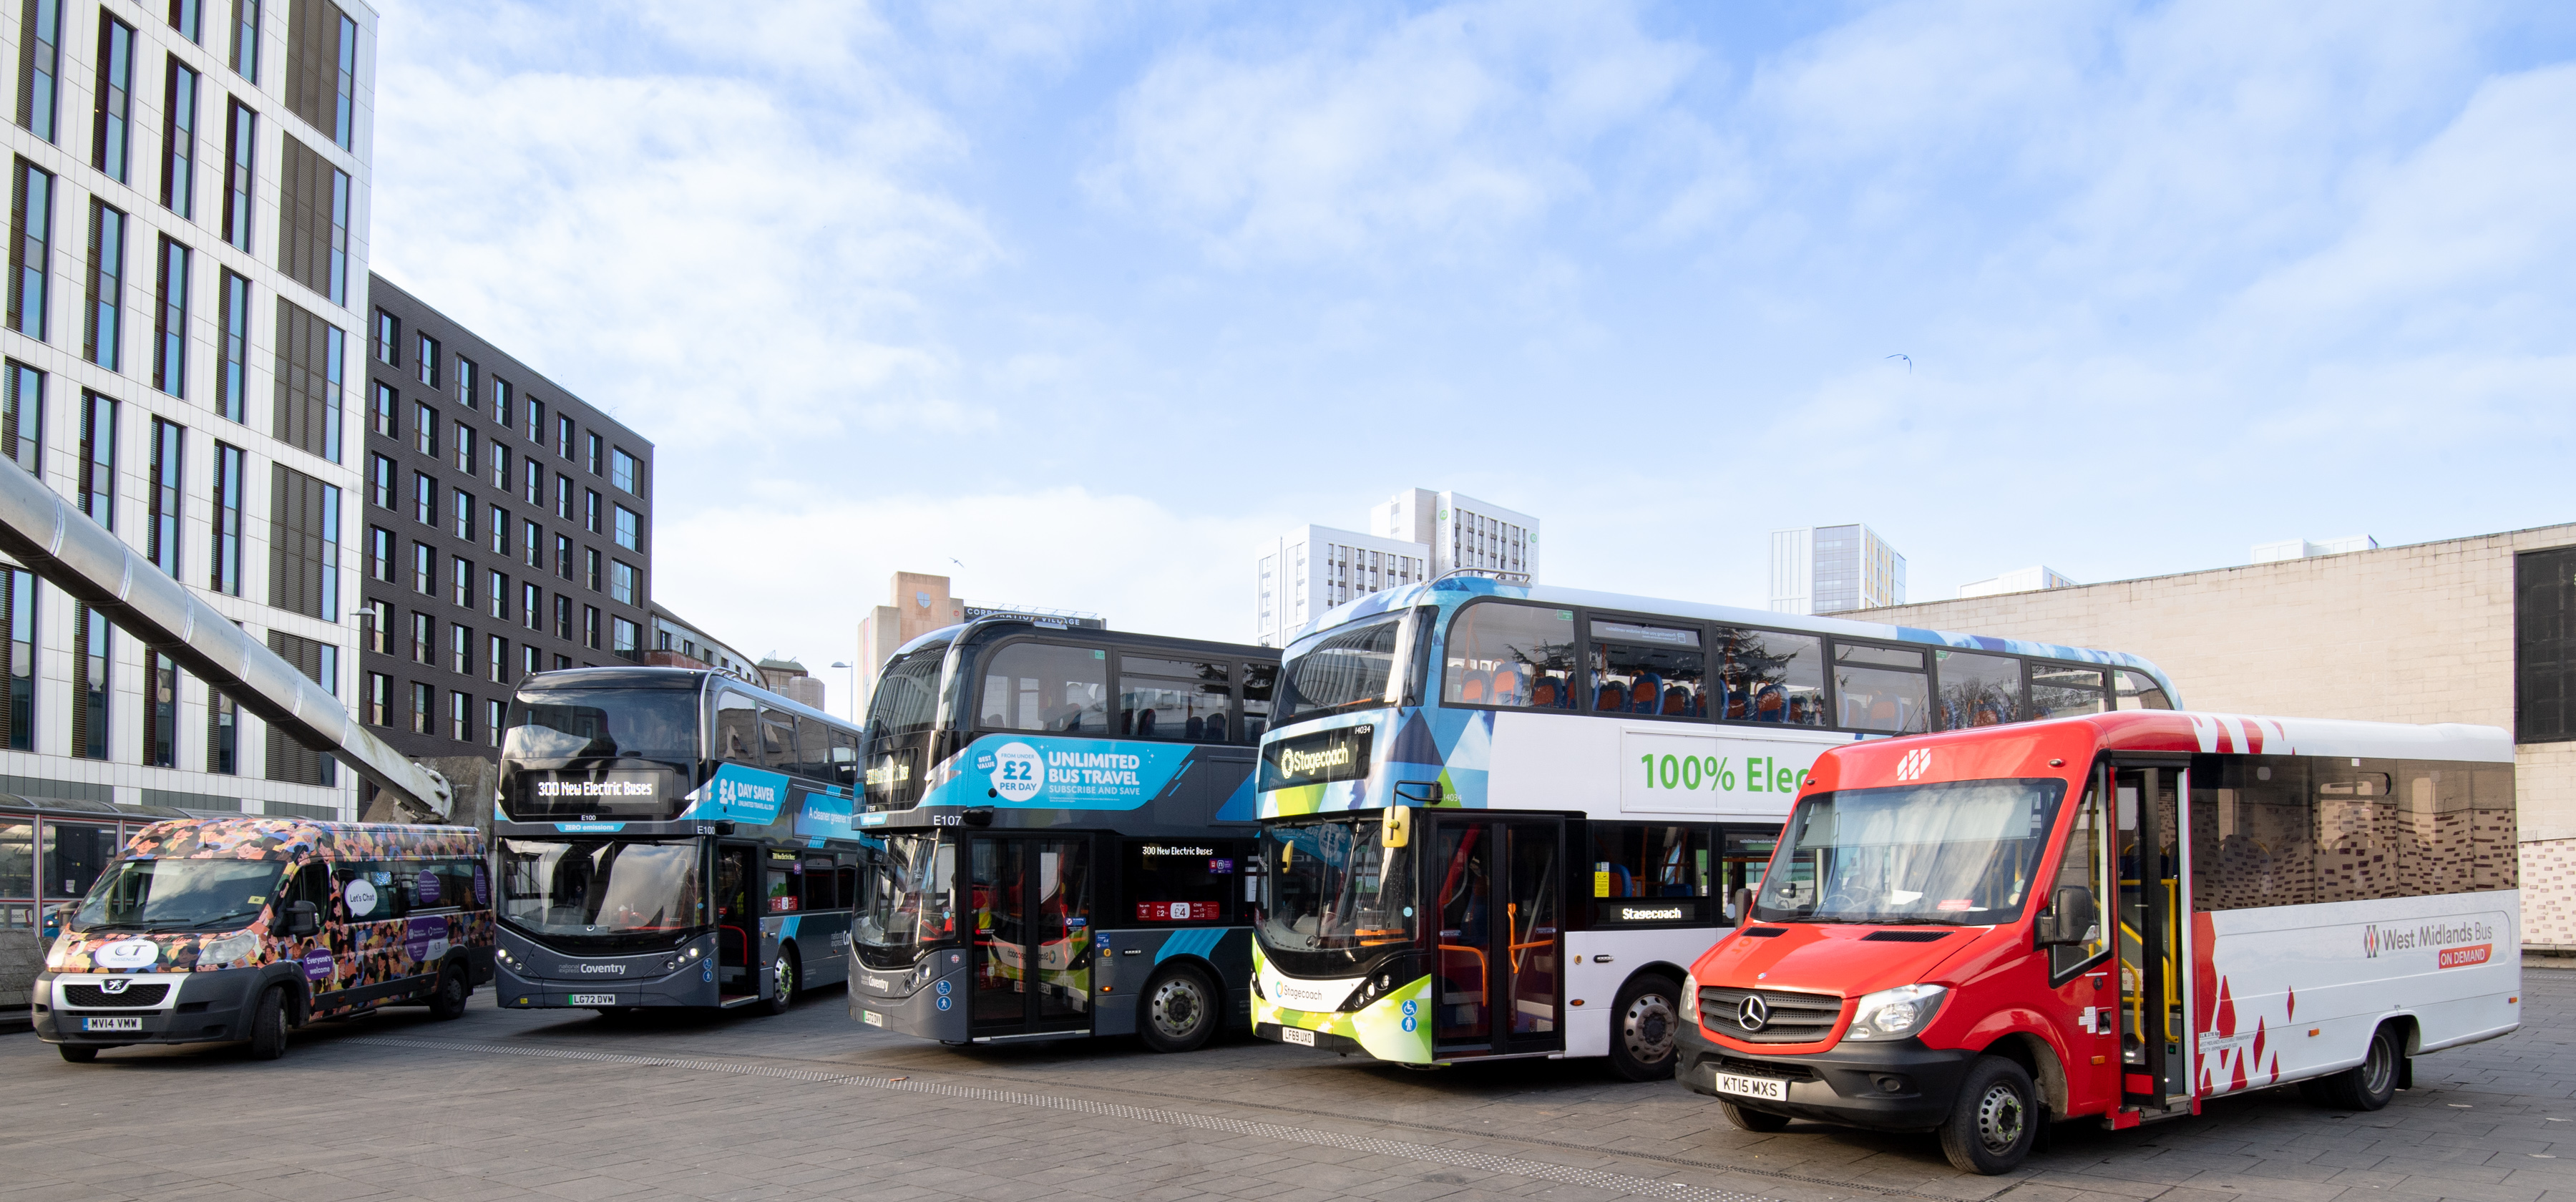 Five buses including minibuses and double deckers showing the variety of operators and services in Coventry